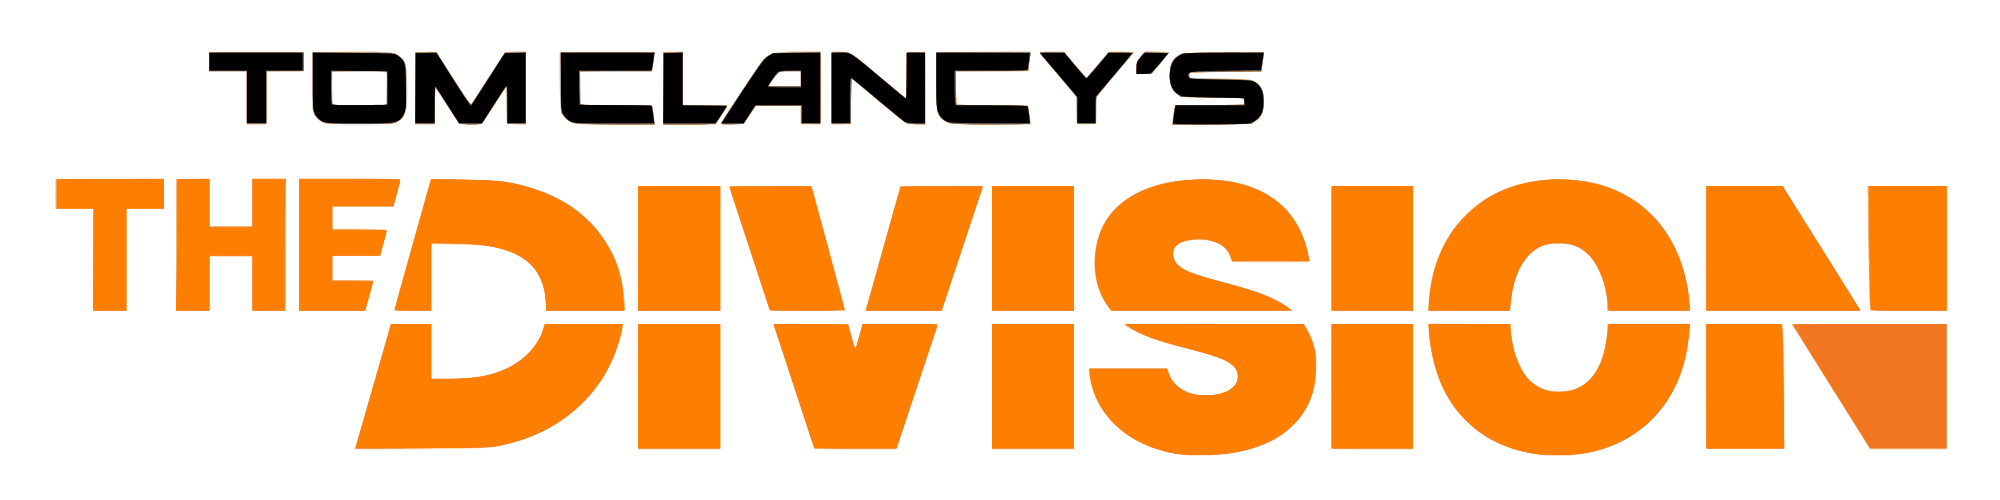 Tom Clancy's the Division Logo - File:Tom Clancy's The Division – Game logo.svg - Wikimedia Commons